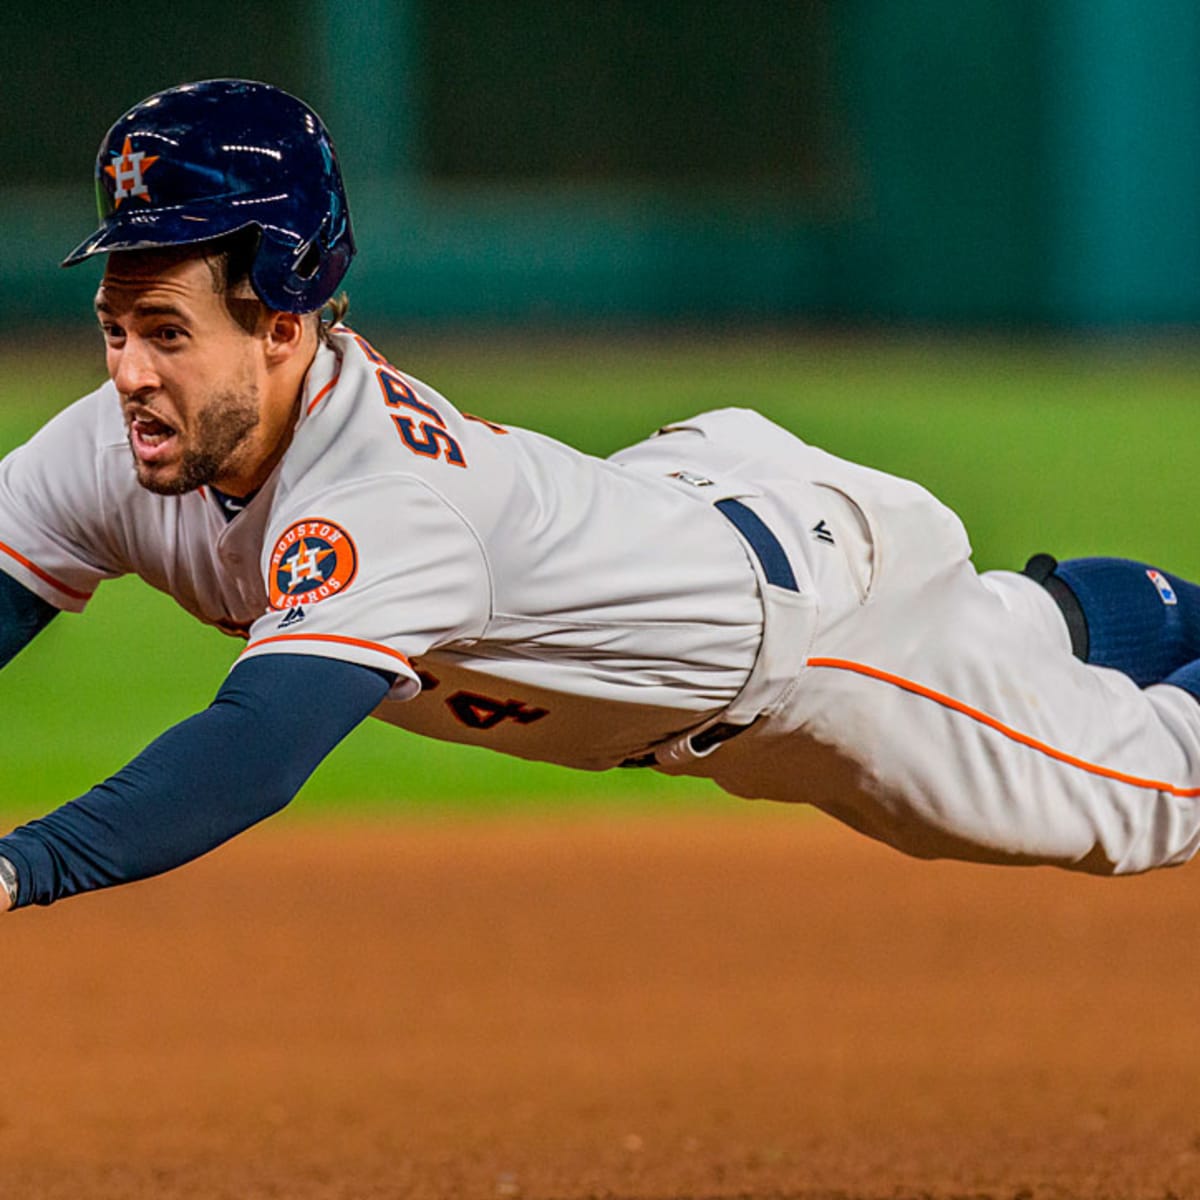 George Springer is gone! Now what? - The Crawfish Boxes